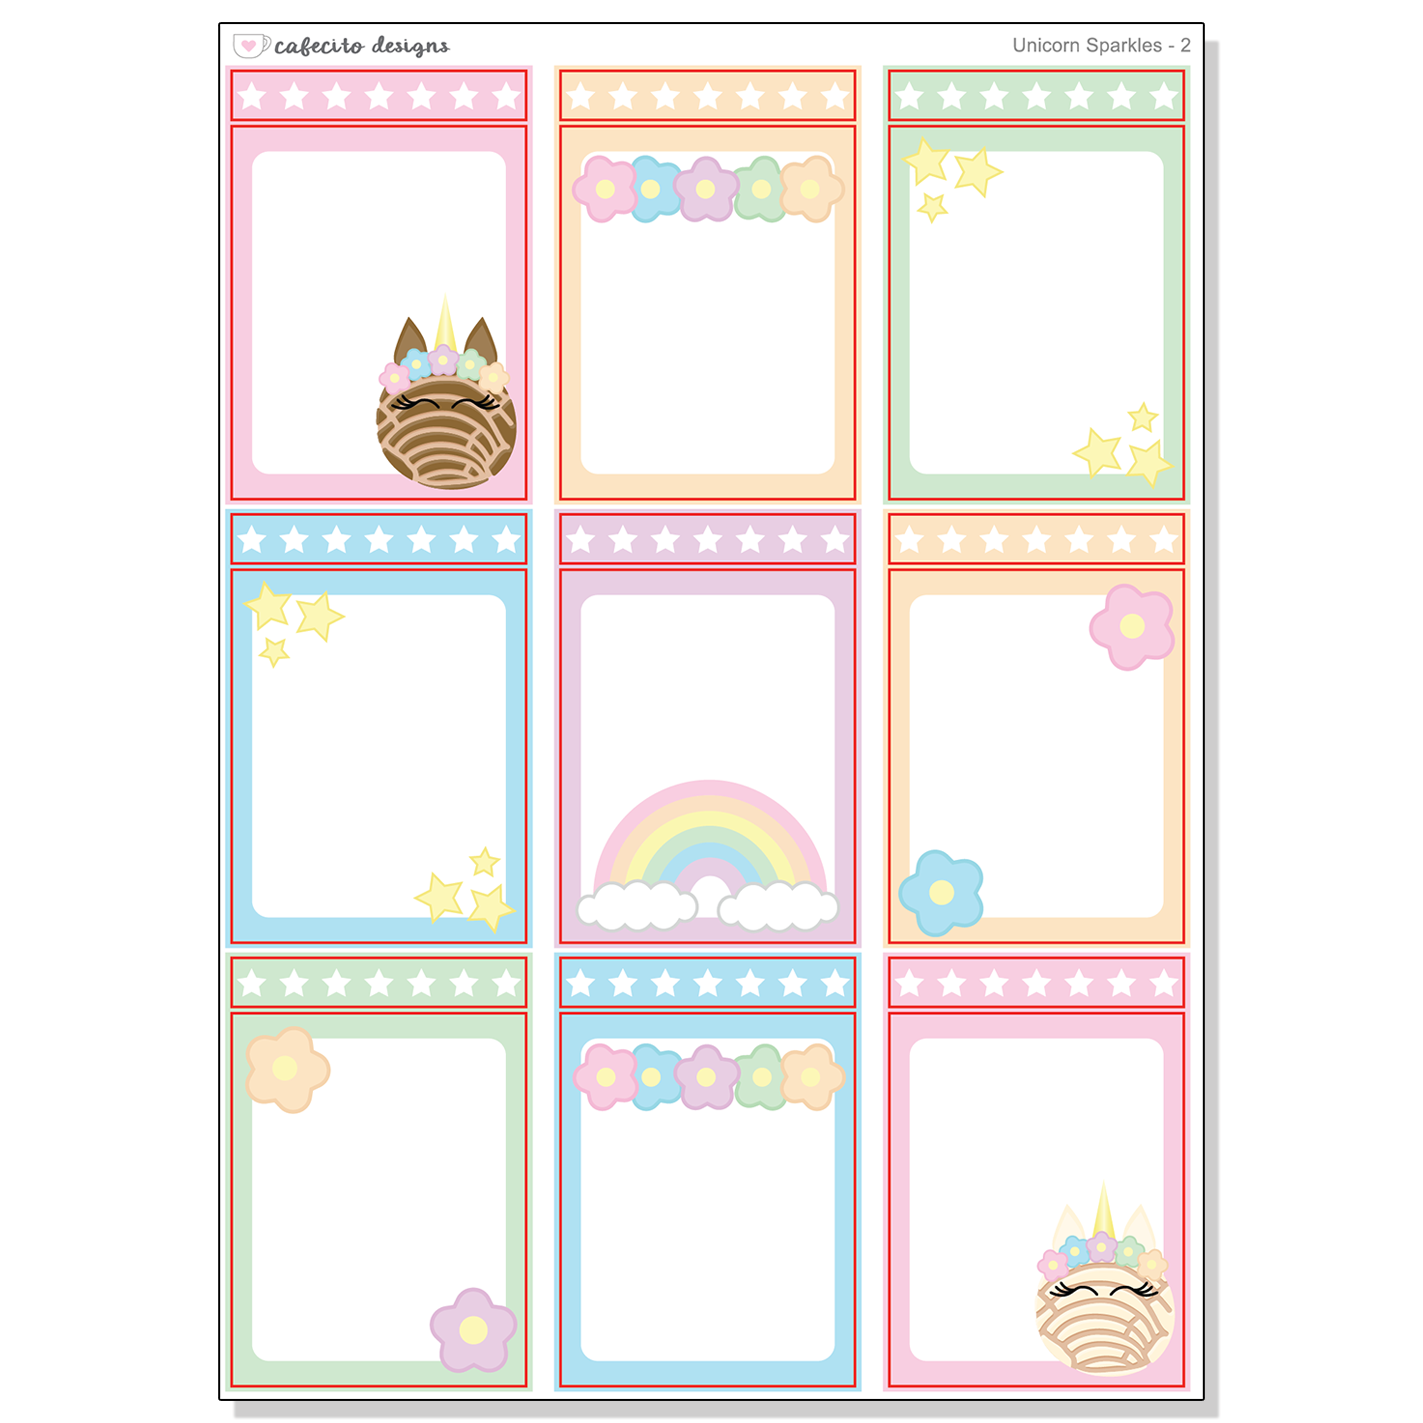 Unicorn Sparkles - Full Boxes With Boarder